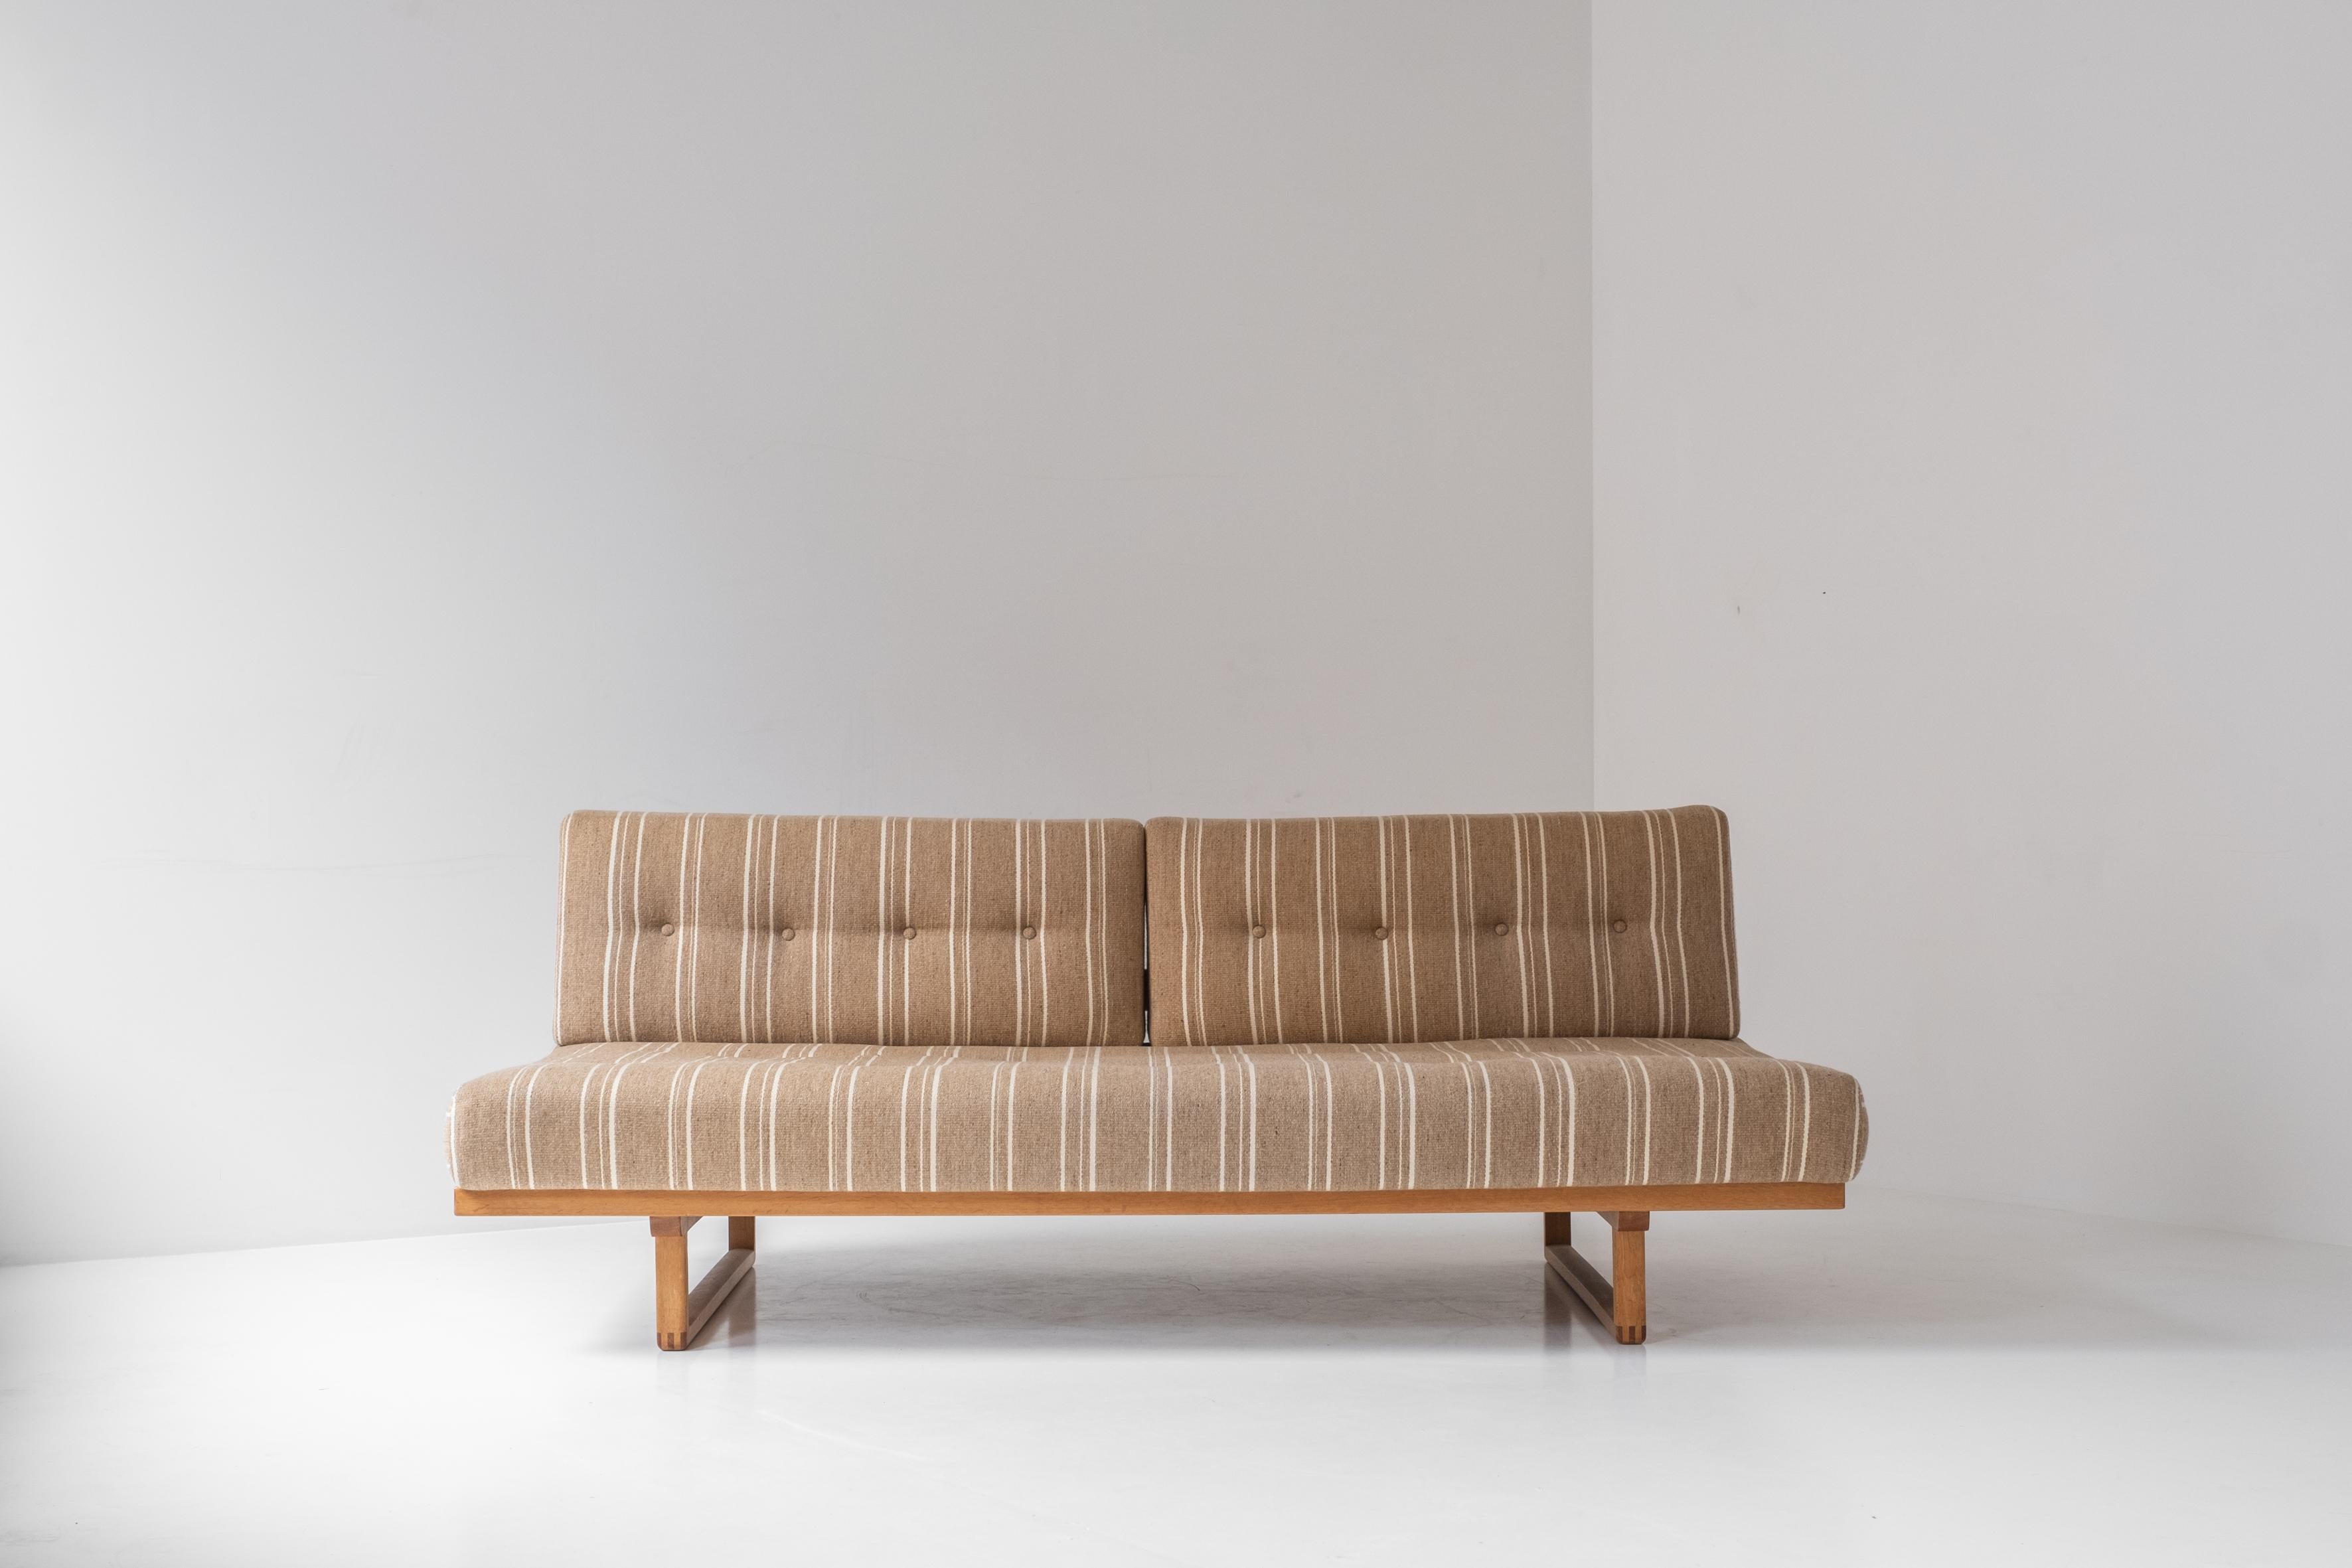 Rare sofa or daybed ‘Model No 4311’ designed by Børge Mogensen for Fredericia Stolefabrik, Denmark 1950s. This sofa features a frame made out of oak and remains the original upholstery, presented in a very good and original condition with only minor